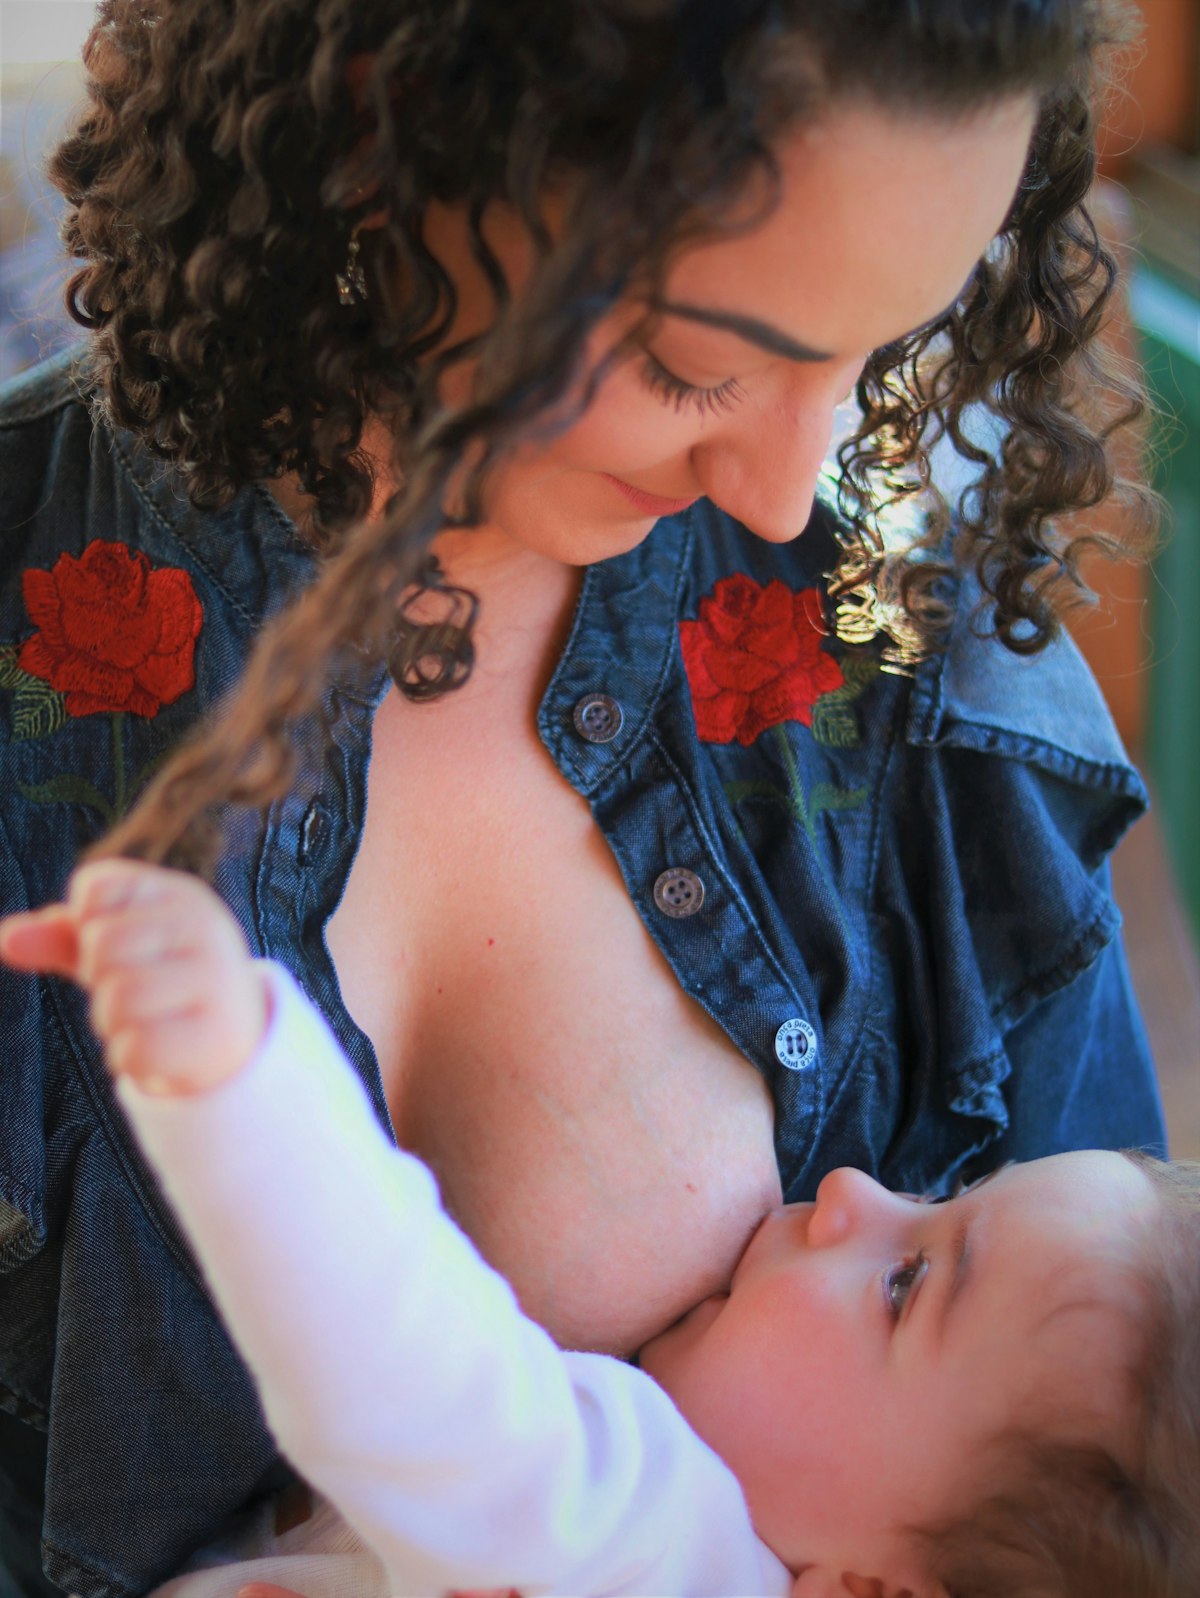 What Are The Benefits of Breastfeeding? Know All